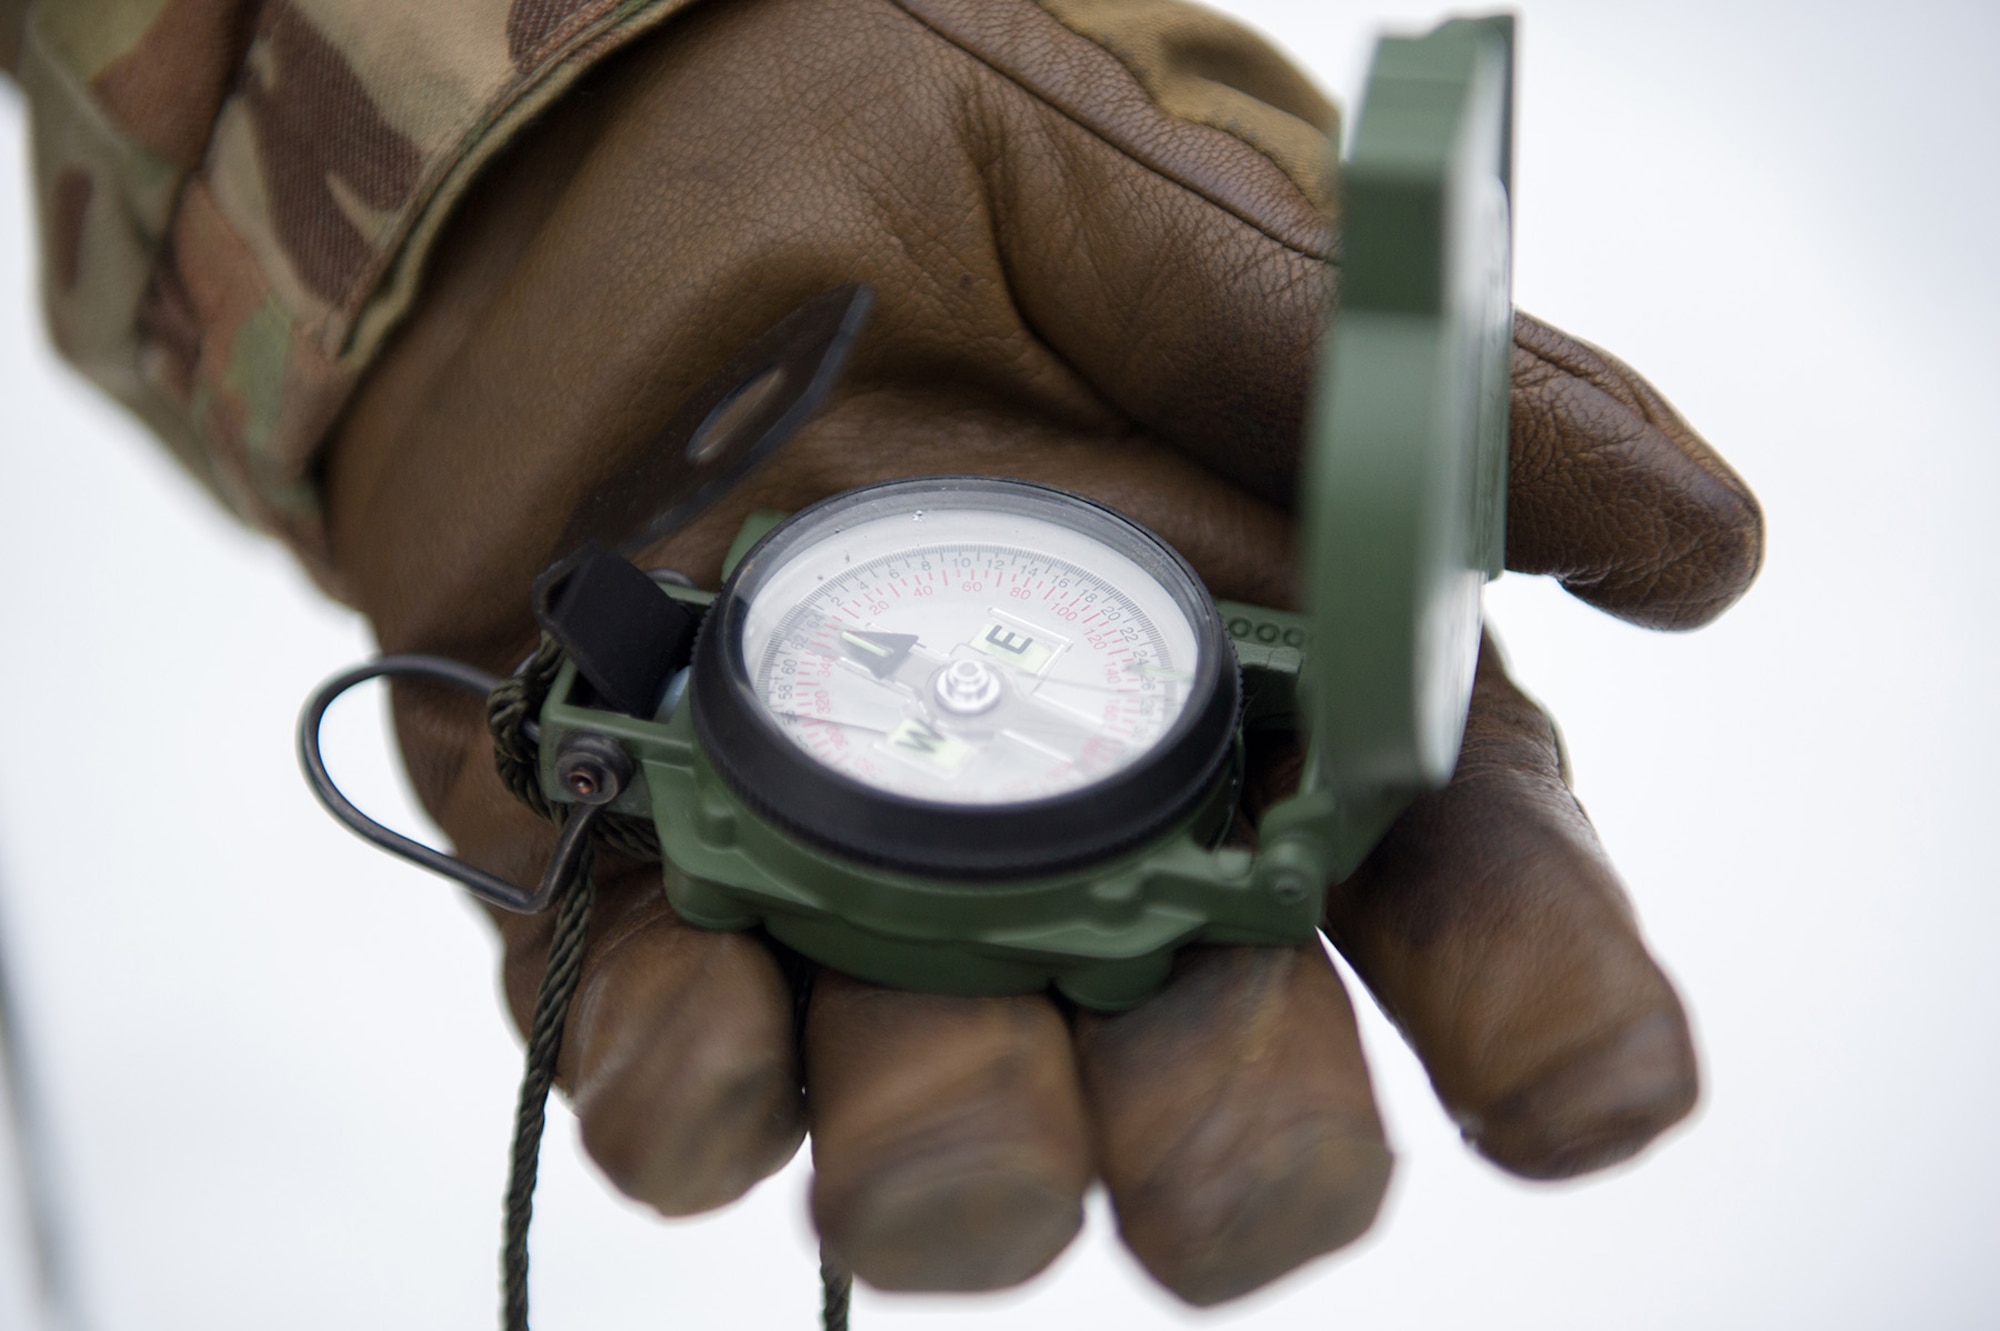 Army Sgt. Carlos Porras, a native of Burlington, NC, assigned to Hawk Company, 3rd Battalion, 509th Parachute Infantry Regiment, 4th Infantry Brigade Combat Team (Airborne), 25th Infantry Division, U.S. Army Alaska, holds a compass during a land navigation course on Joint Base Elmendorf-Richardson, Alaska, April 4, 2018.  The Soldiers used their skills to plot courses using a lensatic compass, protractor, and a 1:25,000 scale map to navigate to, and locate points using provided grid coordinates within a predetermined time.